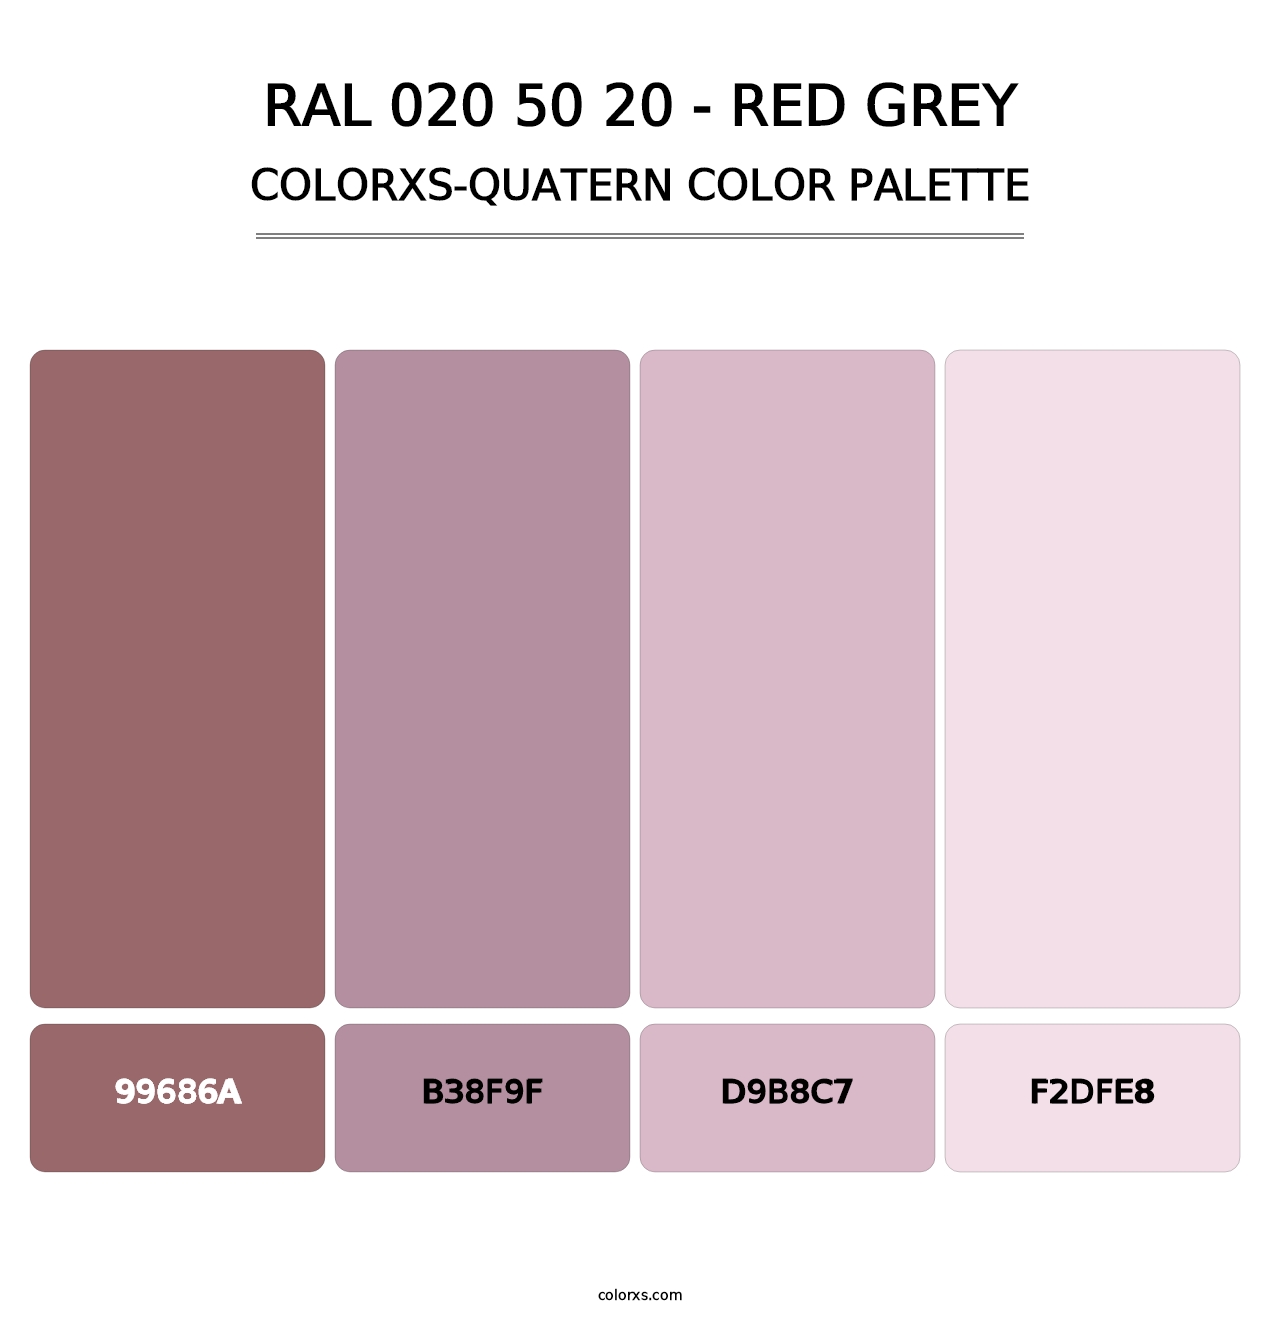 RAL 020 50 20 - Red Grey - Colorxs Quatern Palette